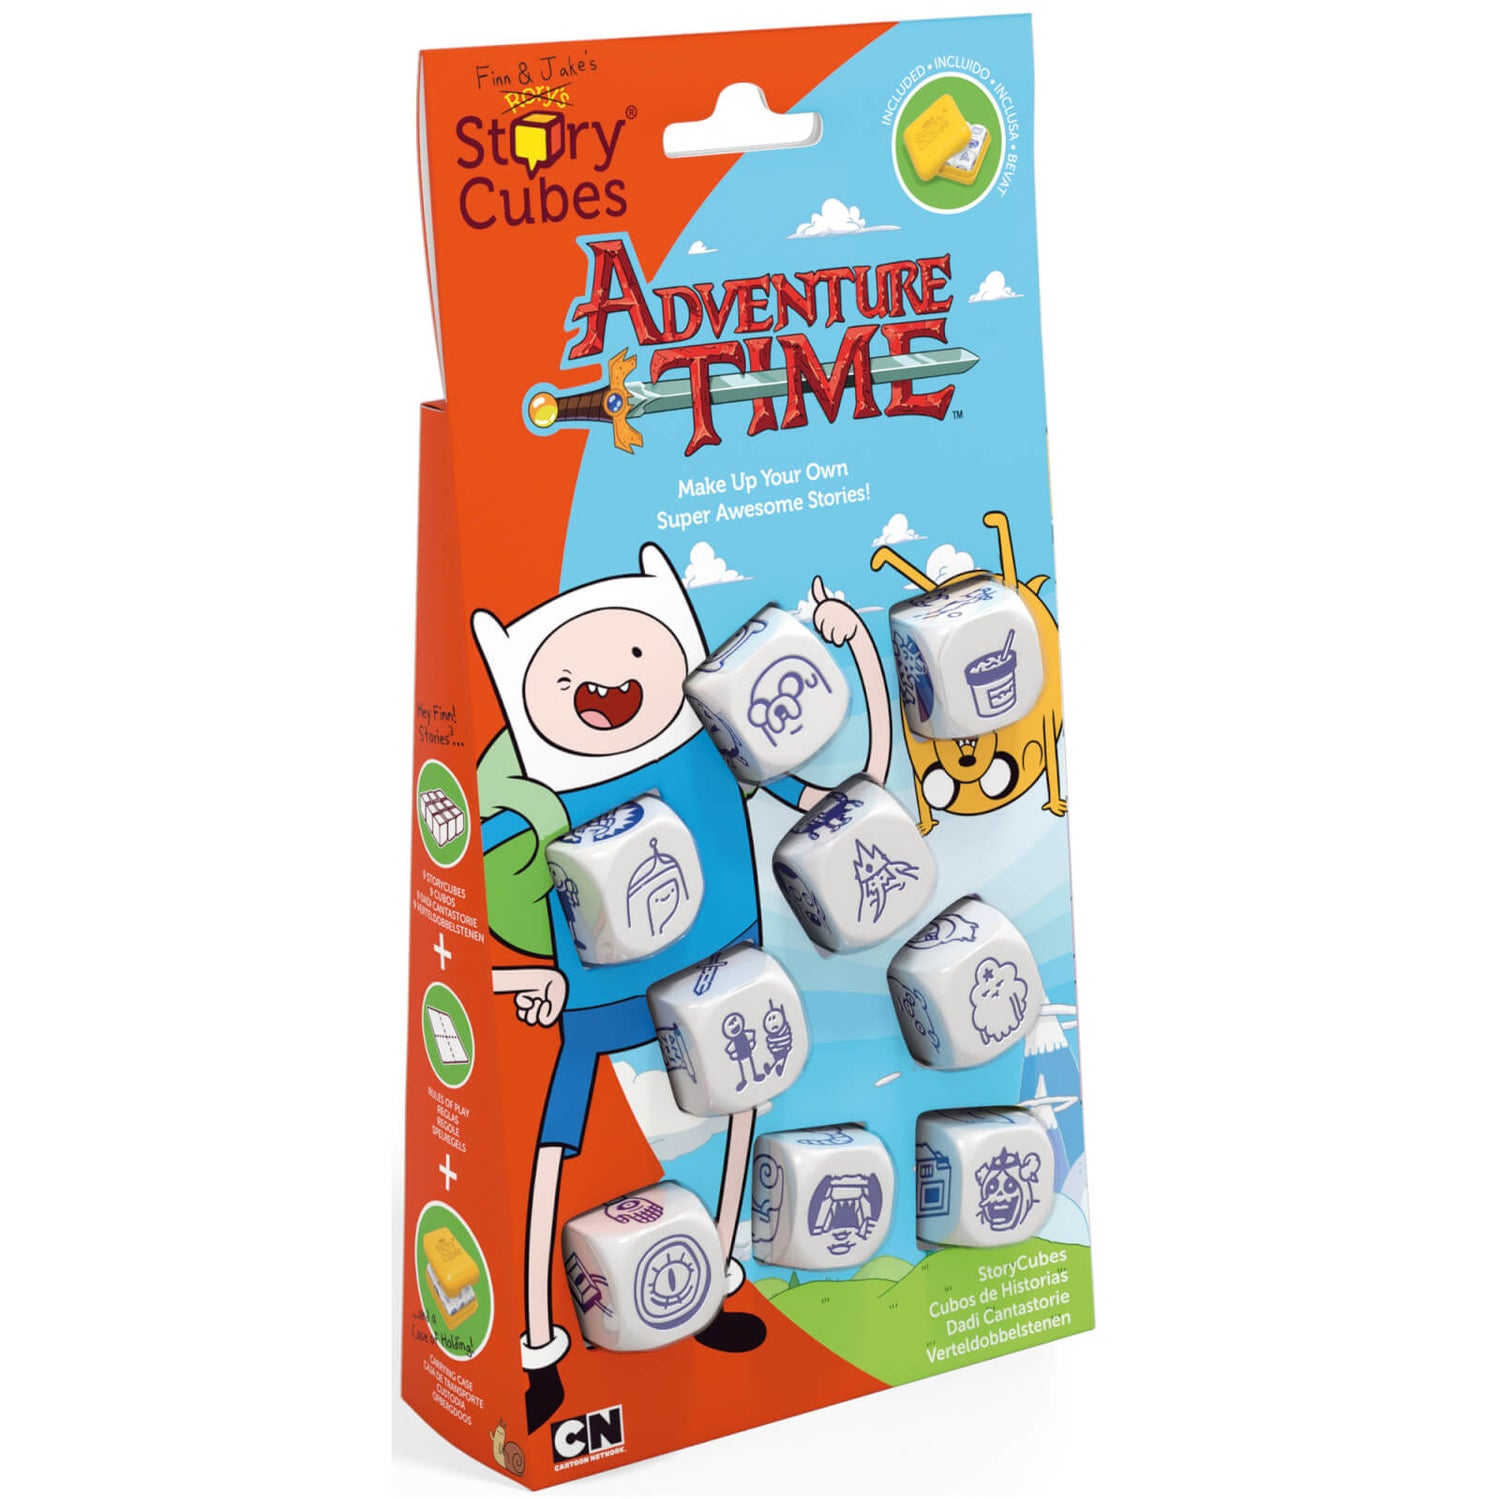 Rory's Story Cubes Adventure Time Edition